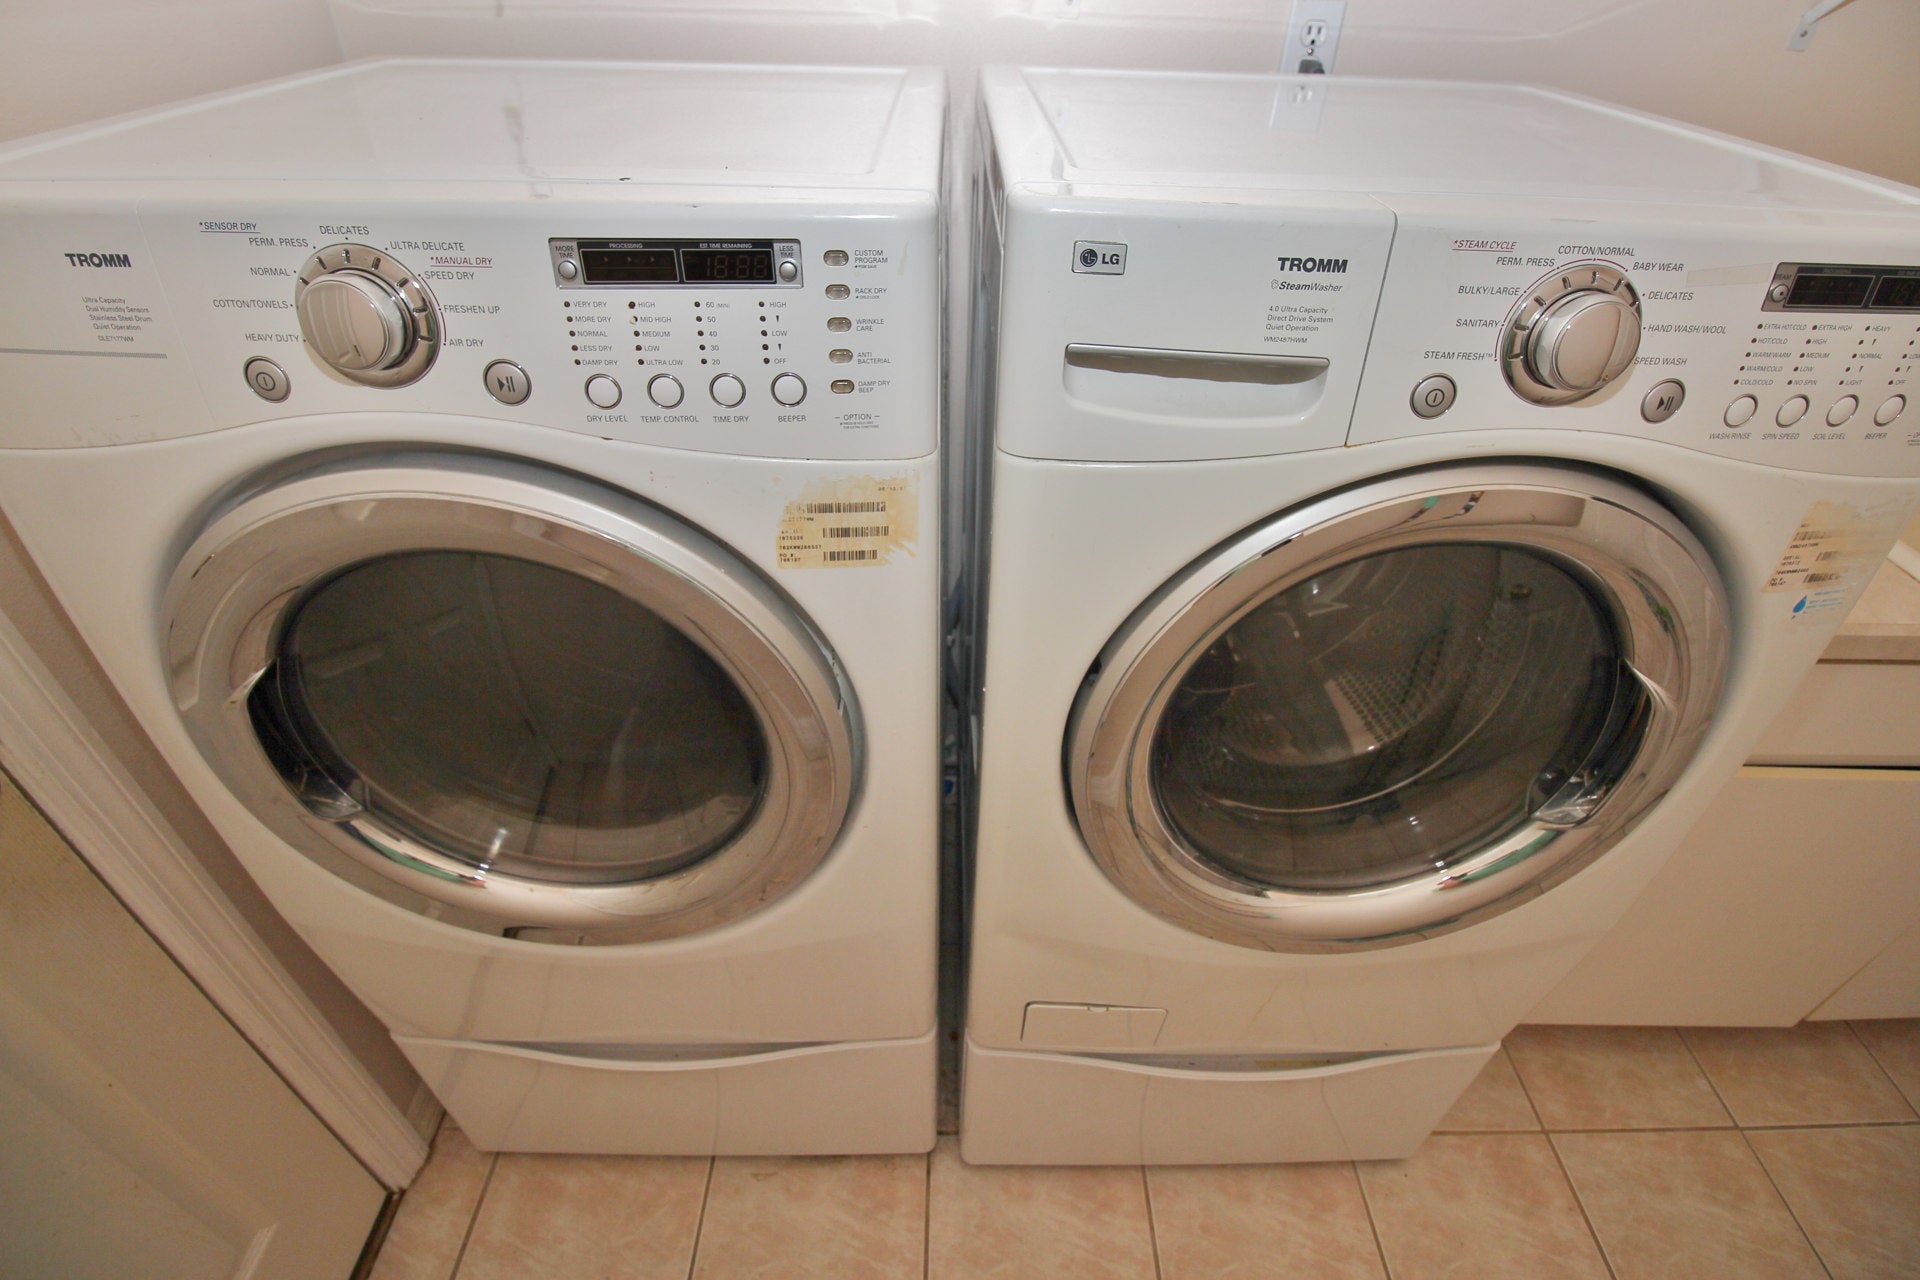 The Washer & Dryer